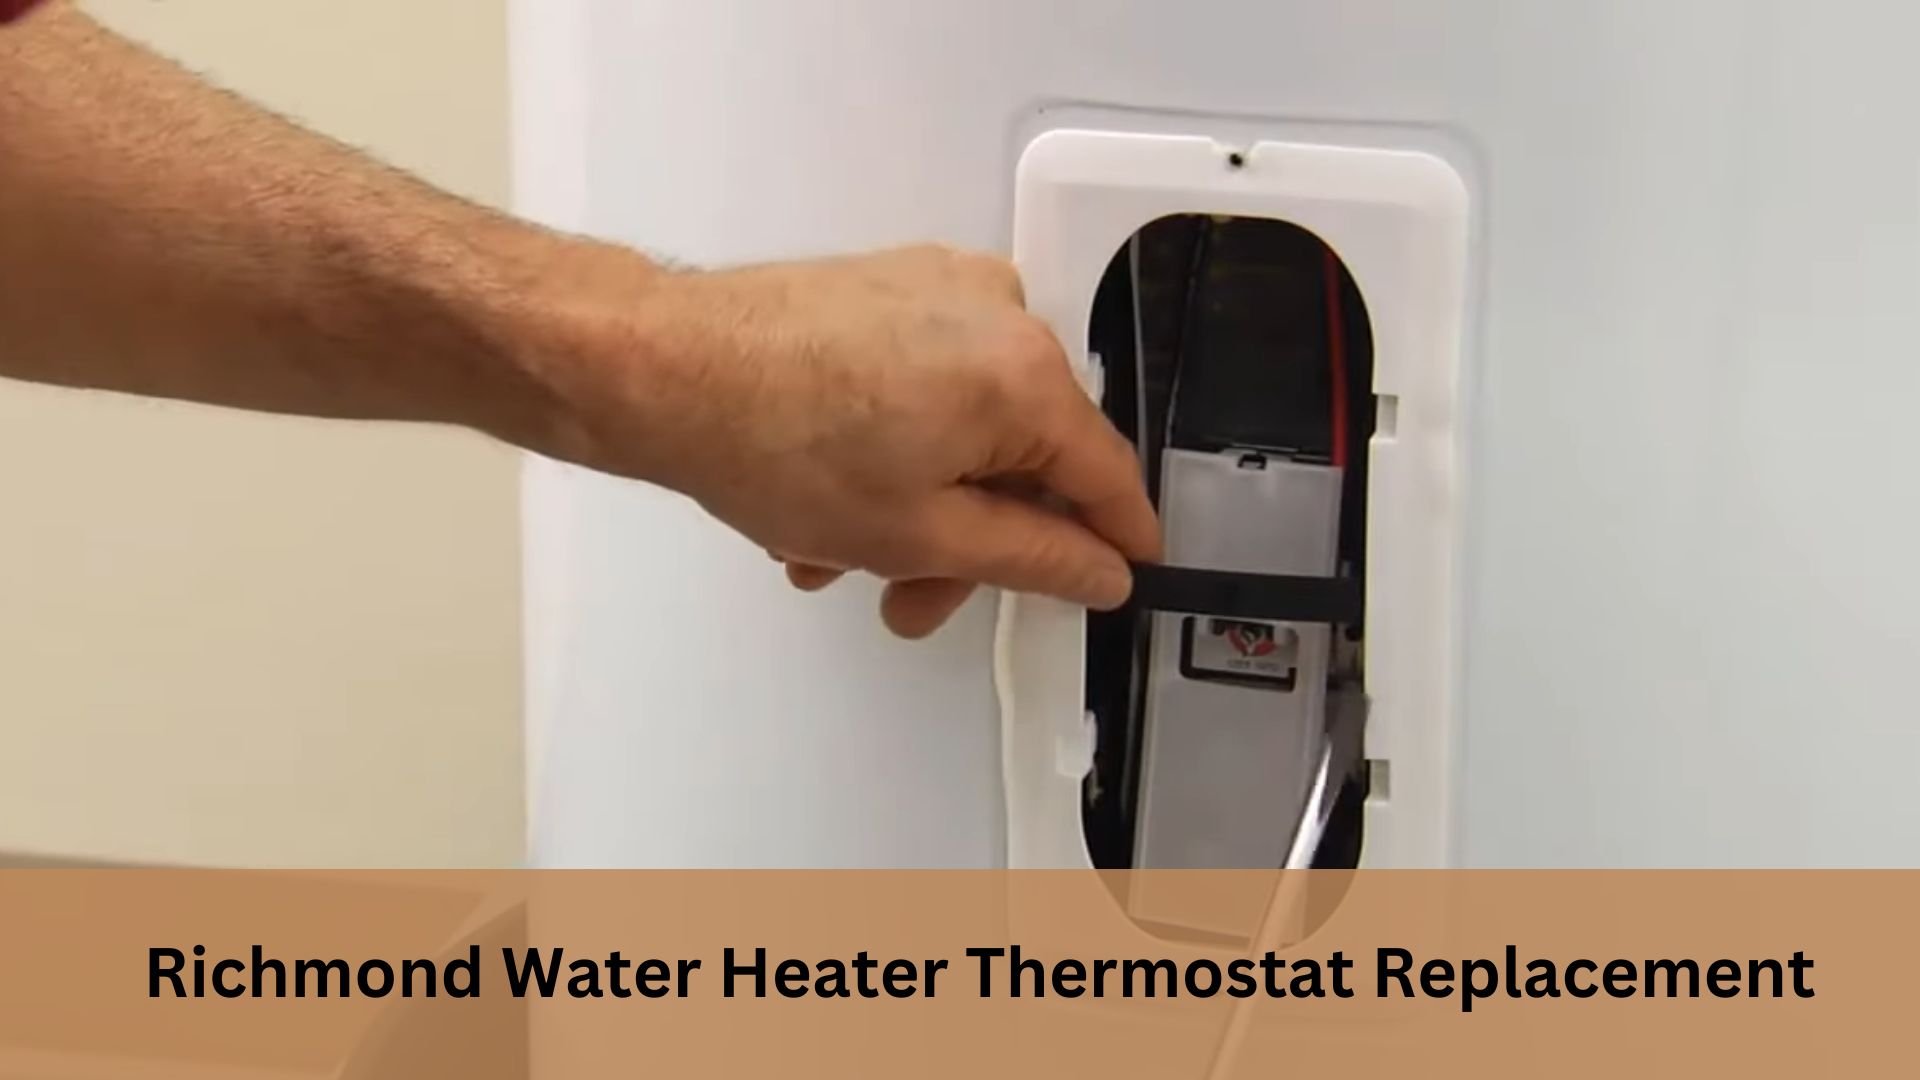 Richmond Water Heater Thermostat Replacement